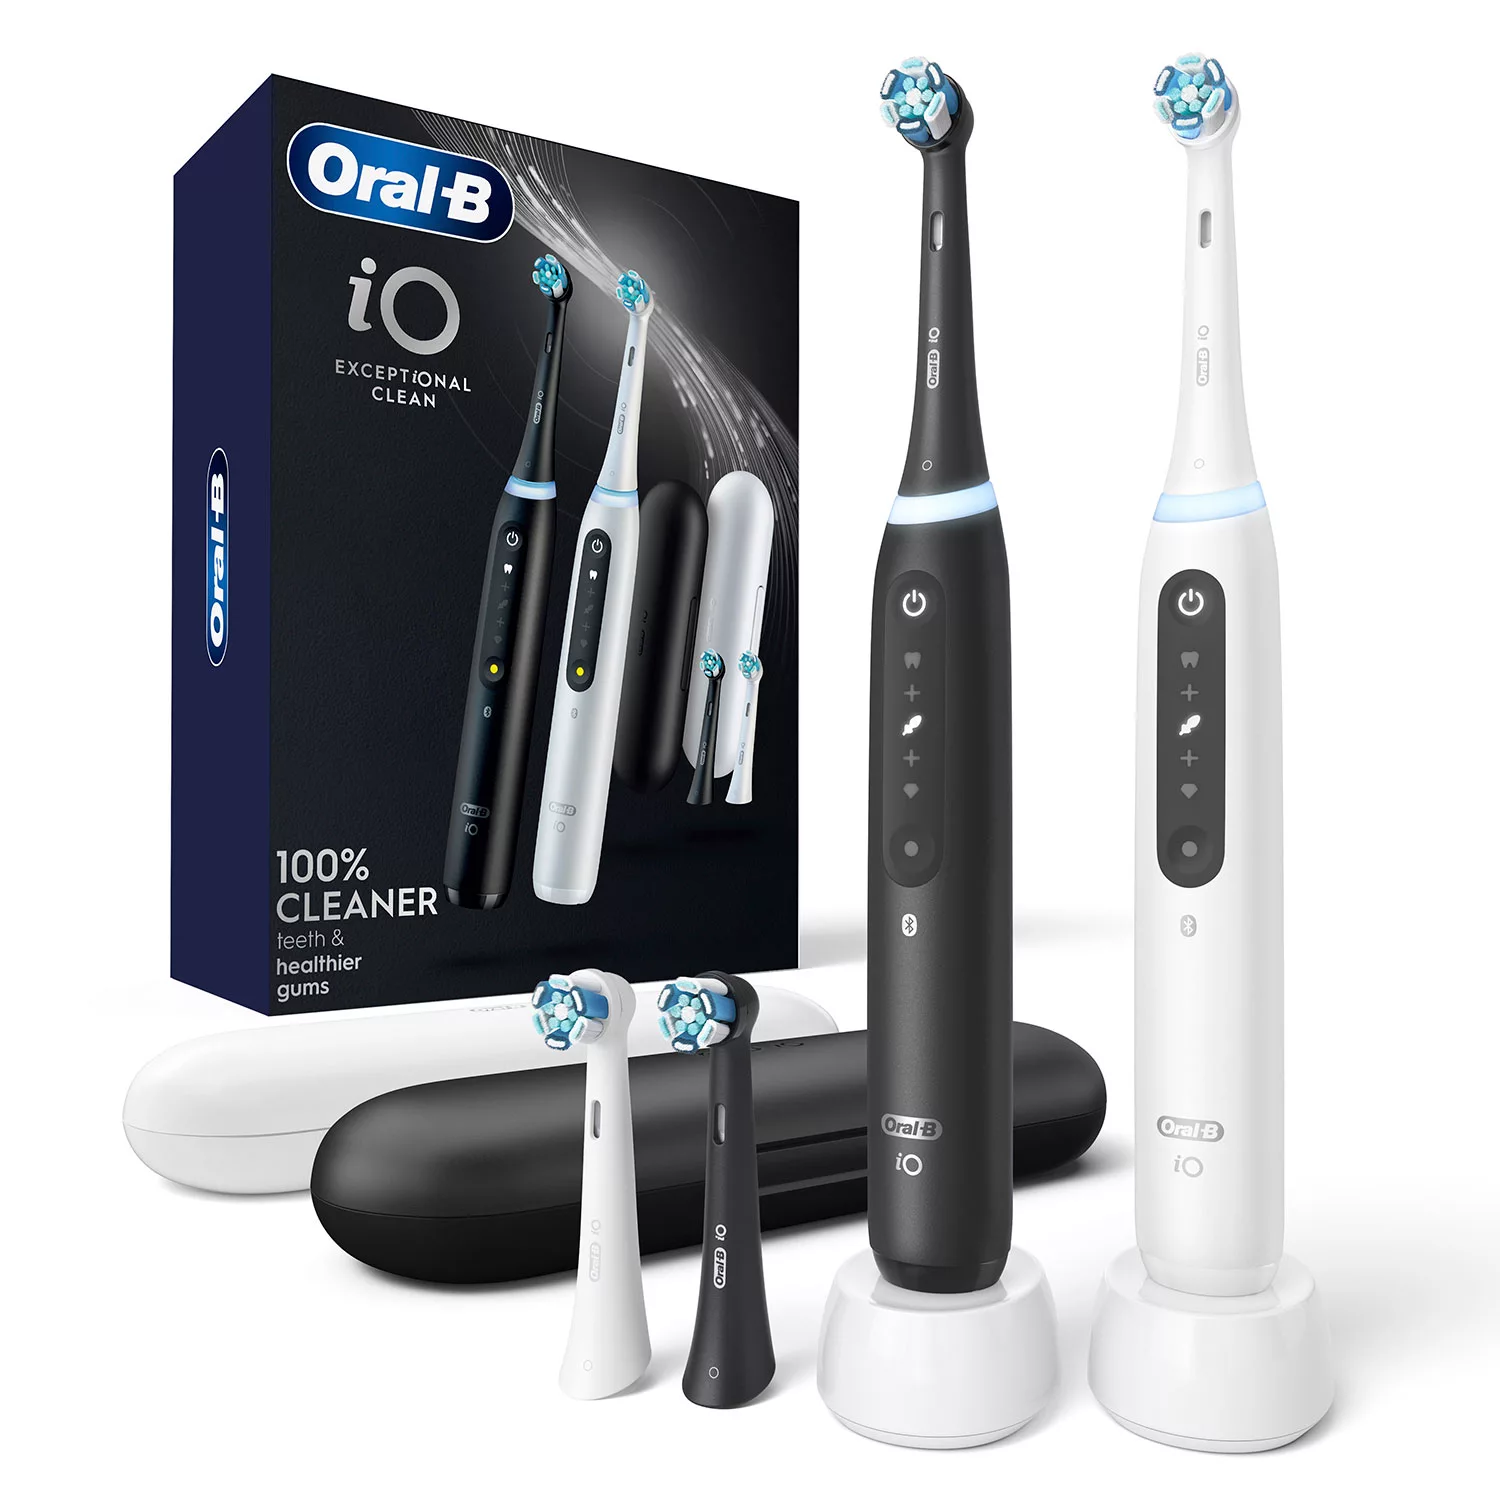 Oral-B iO Series 5 Rechargeable Toothbrush Dual Pack (Copy)